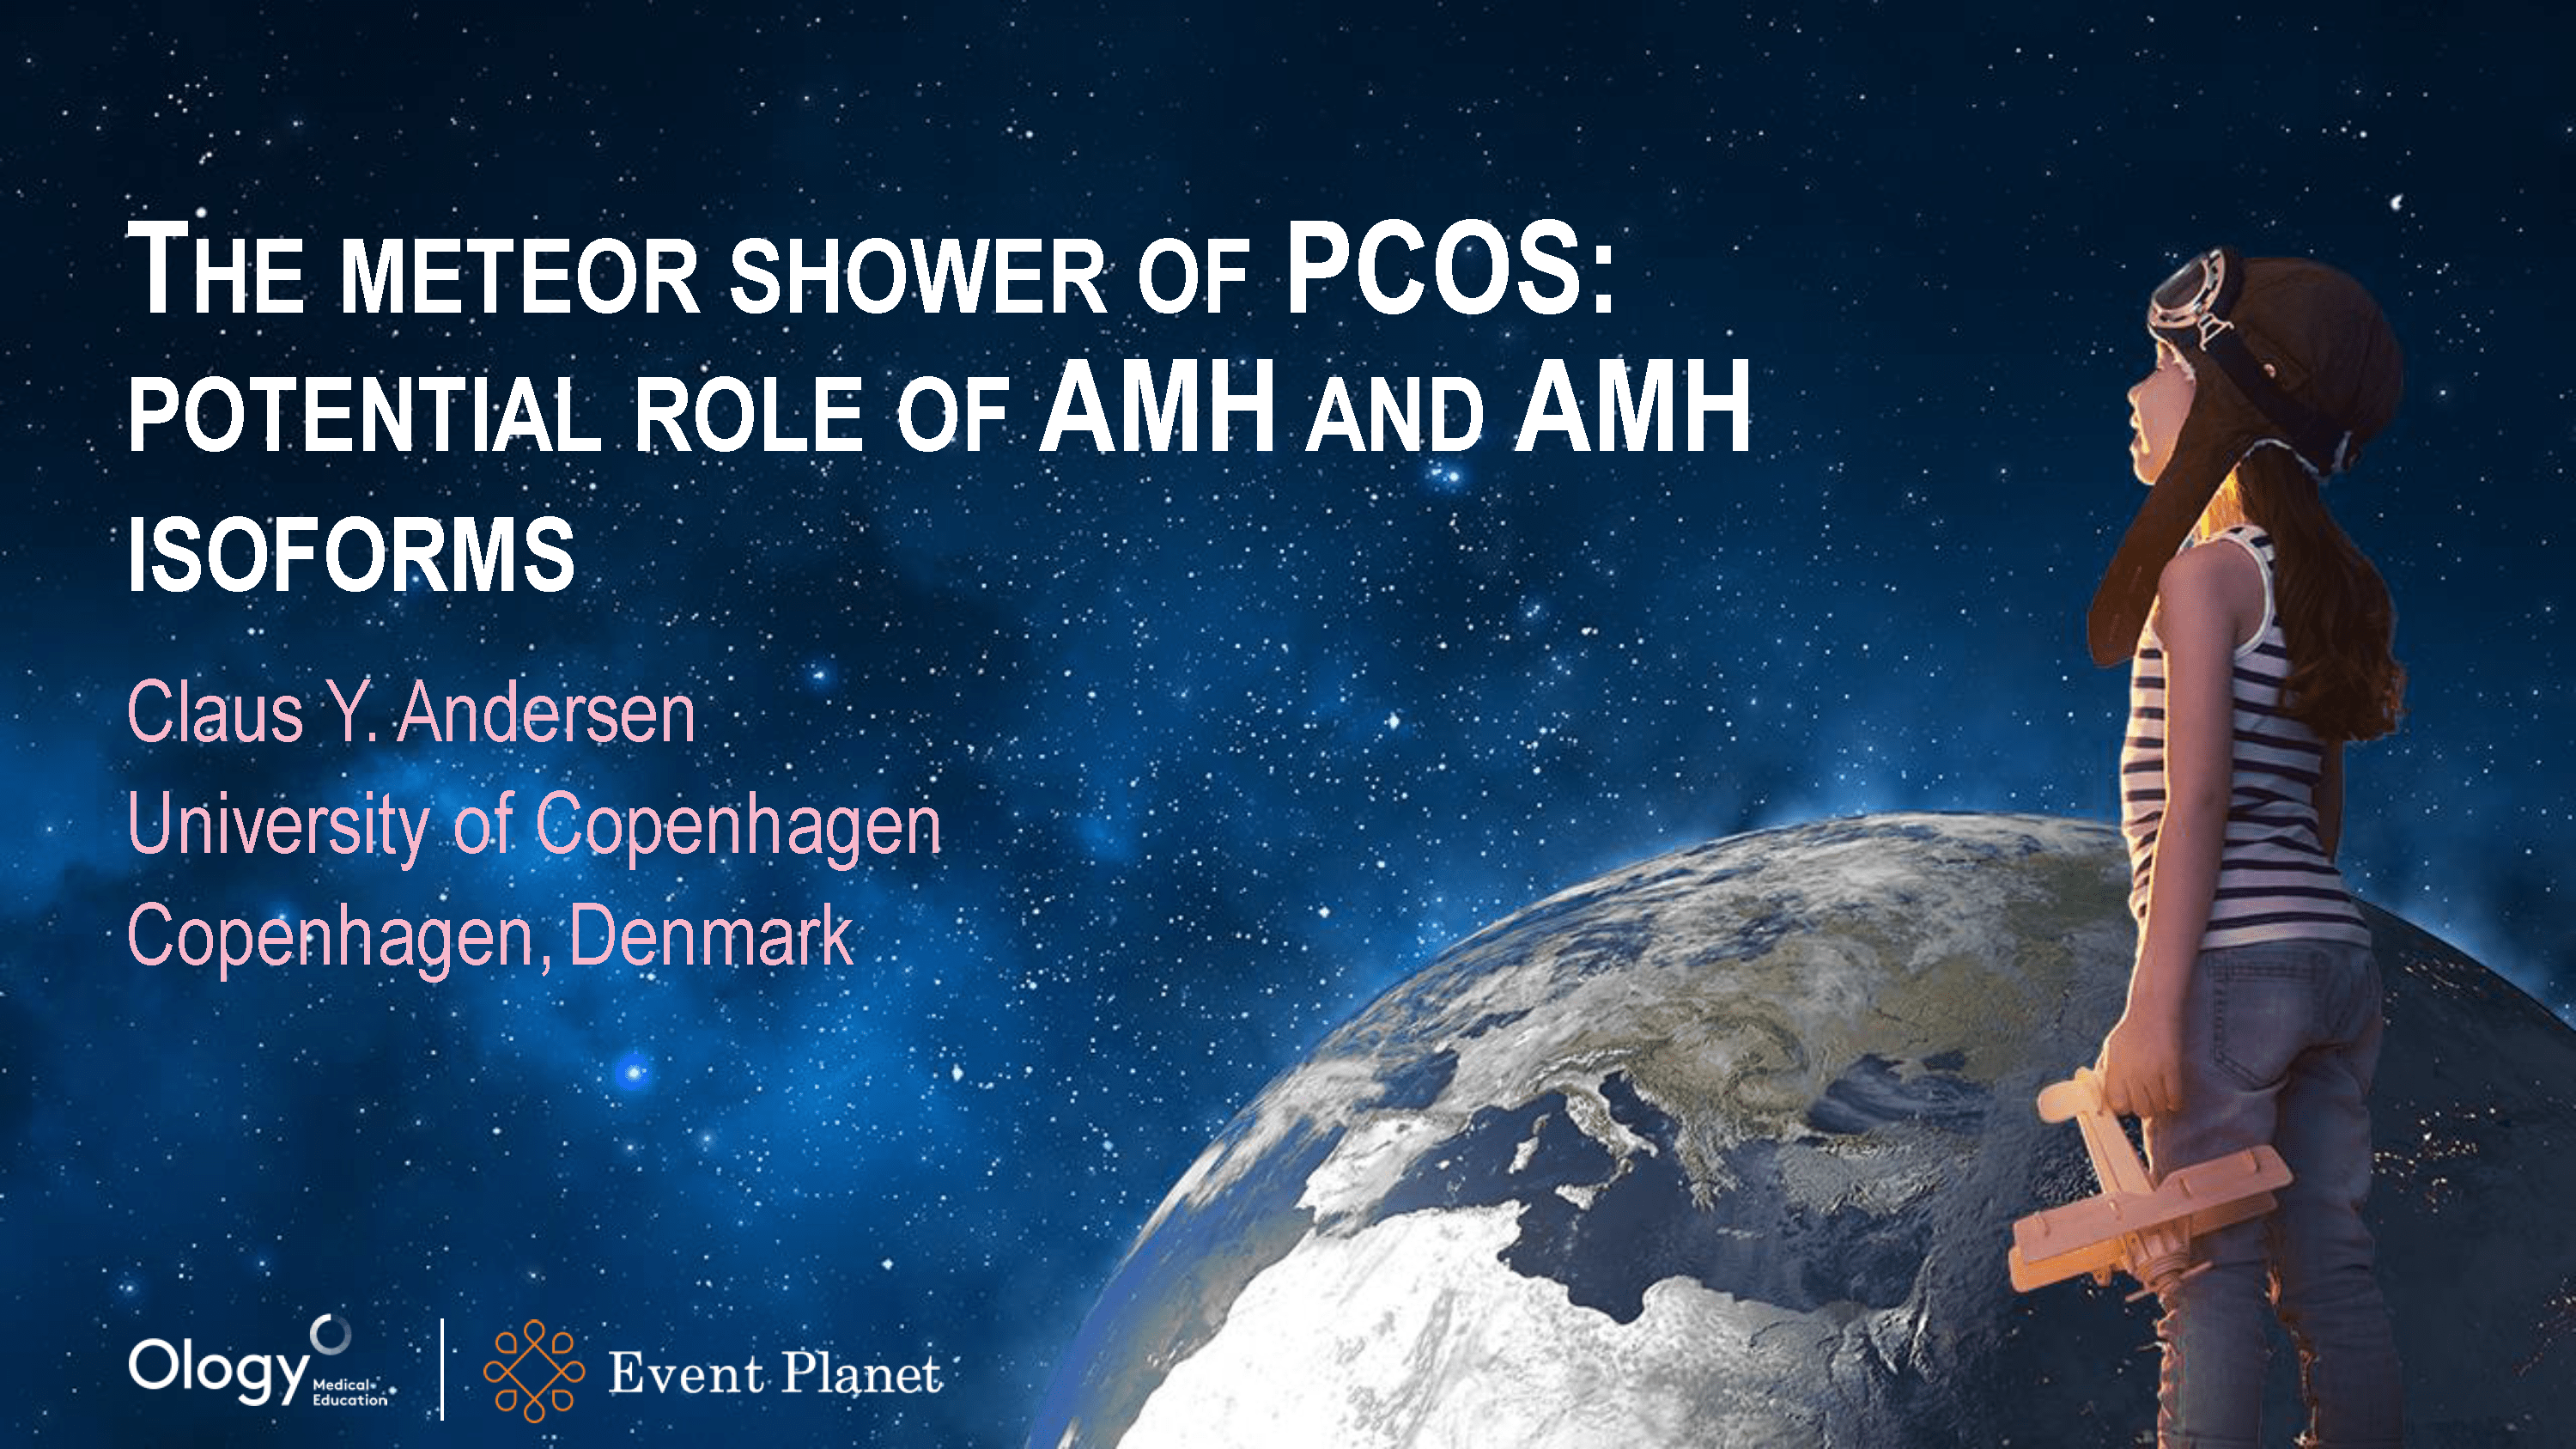 The meteor shower of PCOS: potential role of AMH and AMH isoforms  